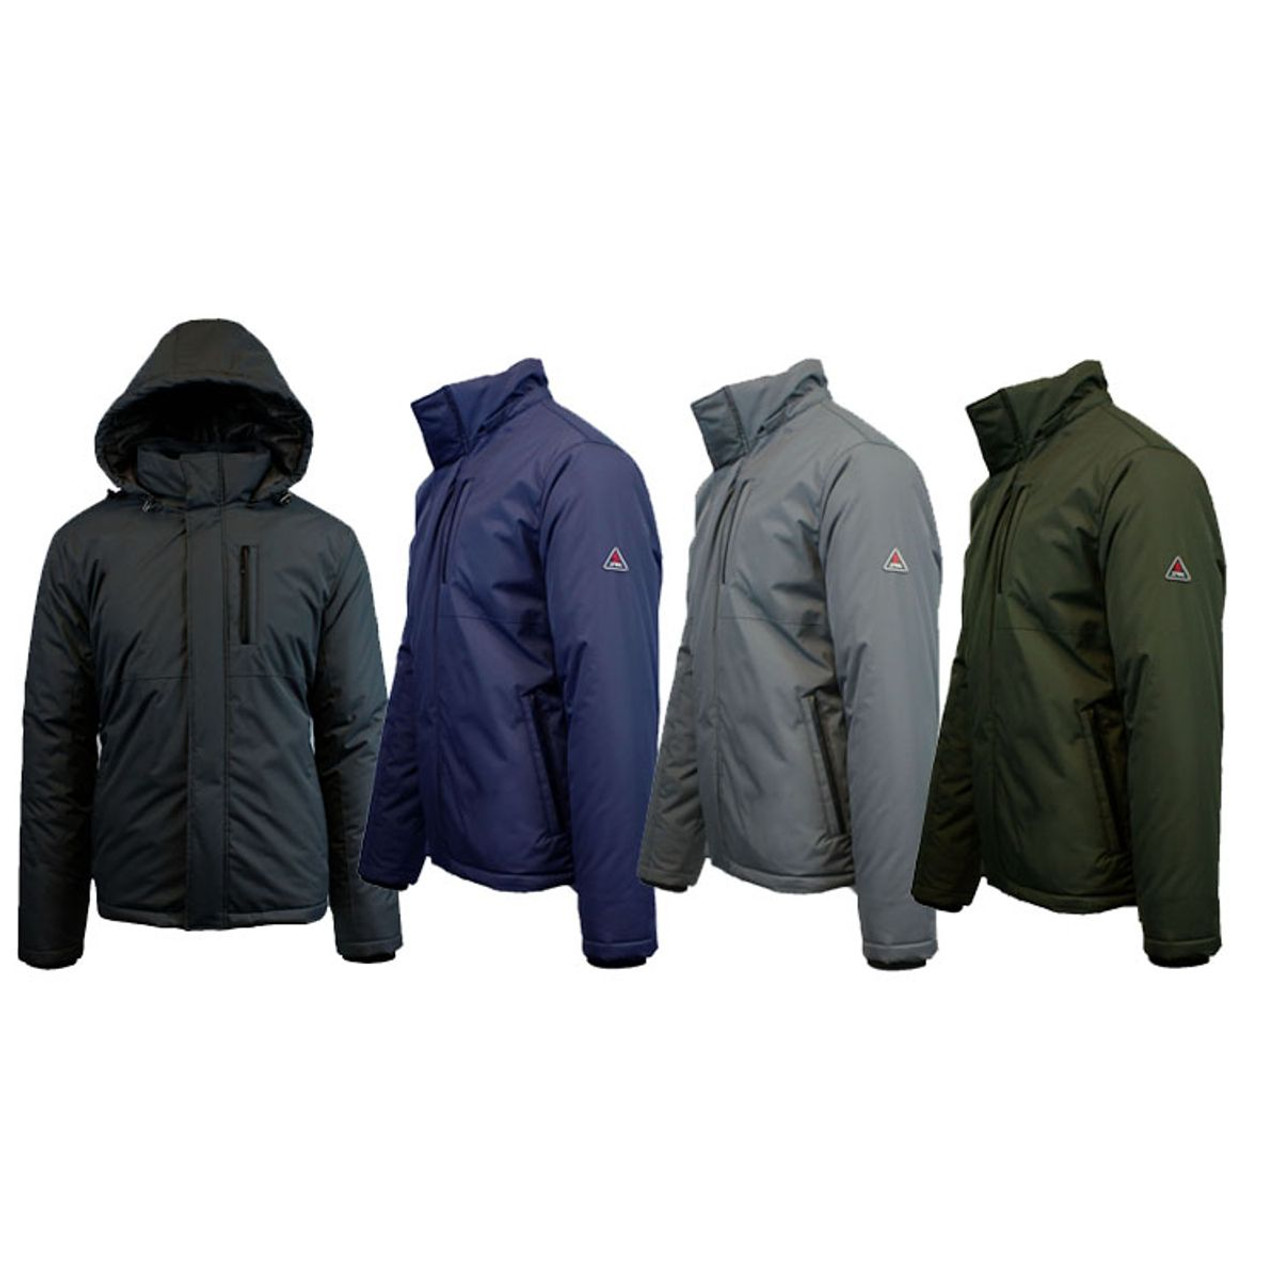 Men's Heavy Weight Water Resistant Tech Jacket with Detachable Hood product image